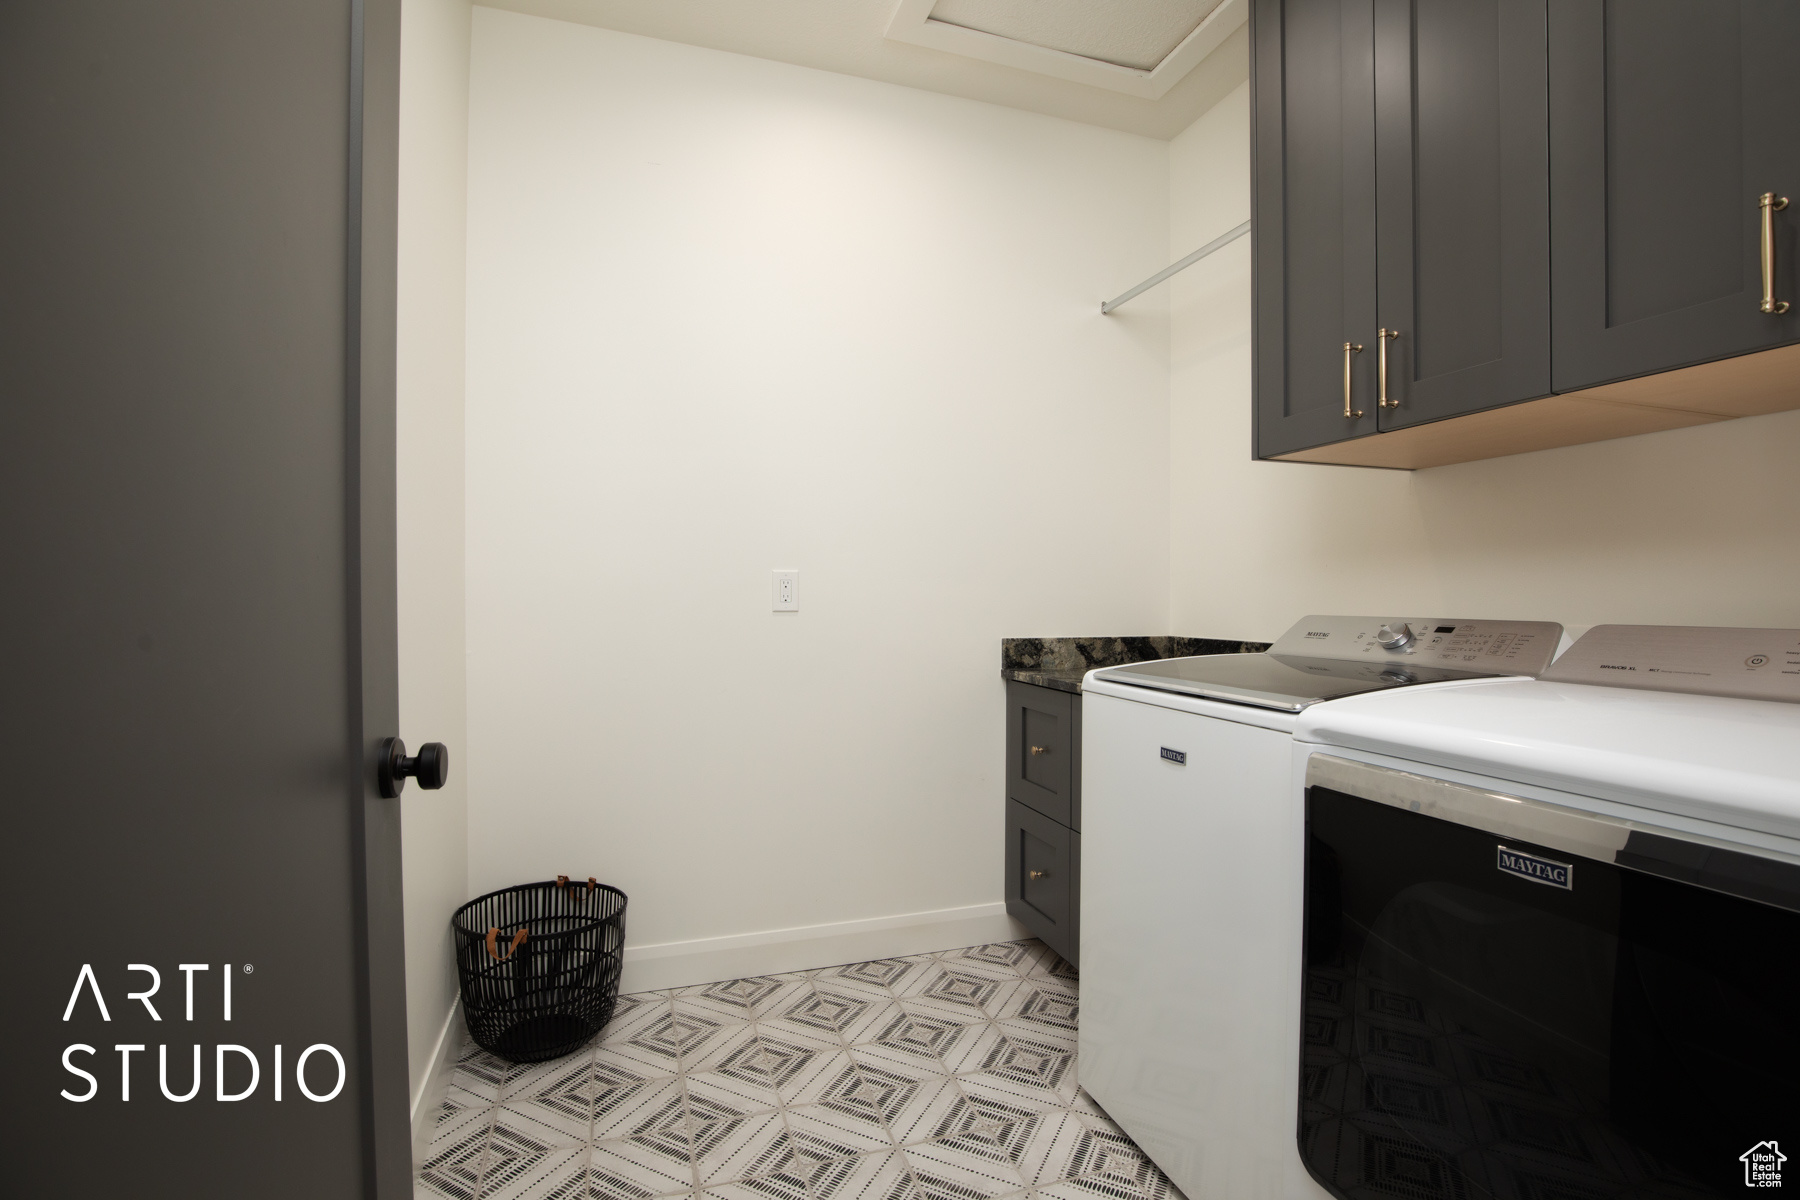 Laundry room with cabinets, light tile floors, and washing machine and dryer